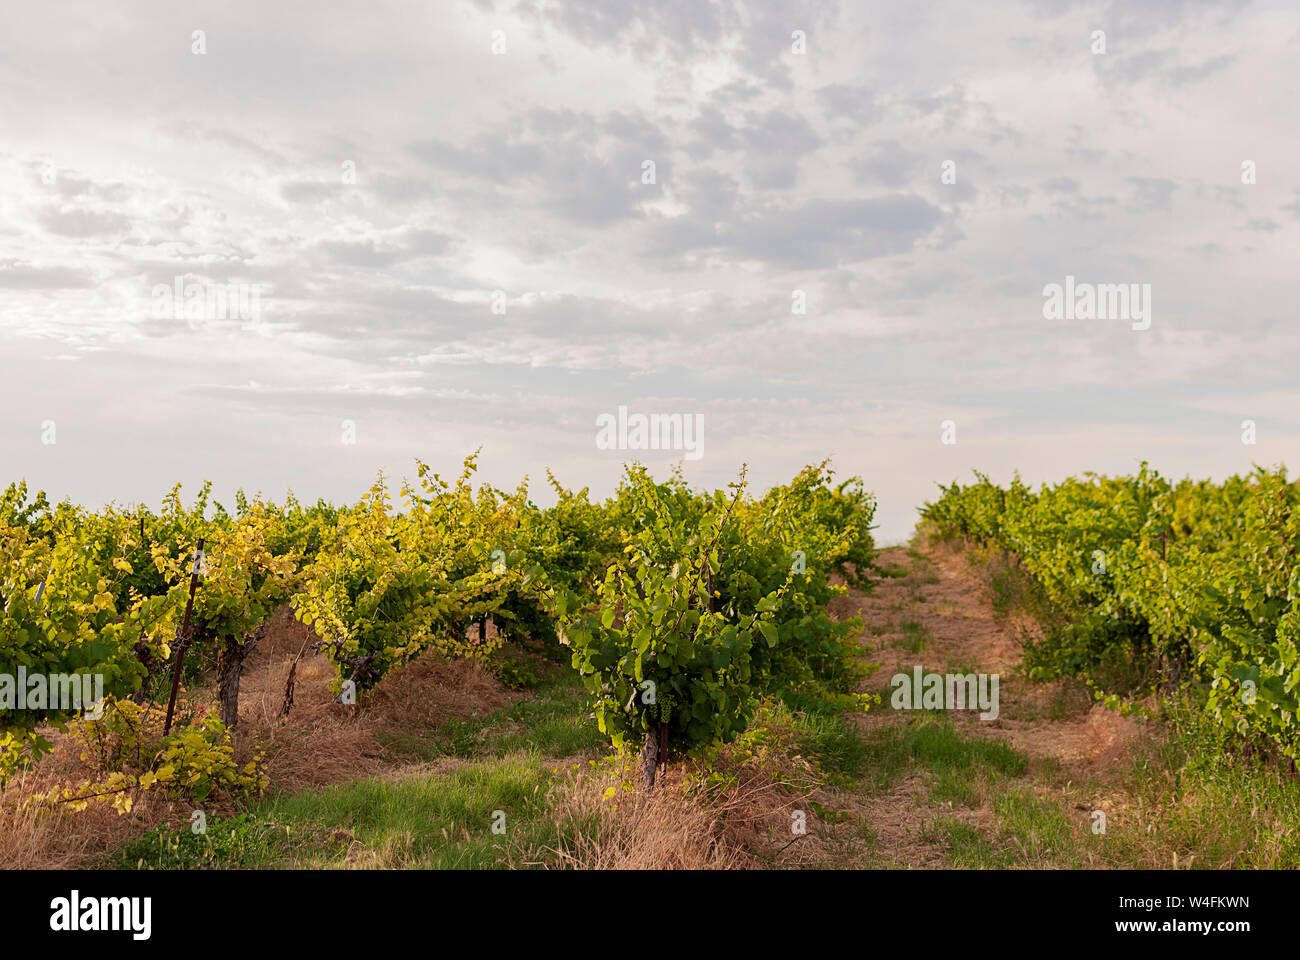 Raimat vineyard landscapes with the system of irrigation by dripping water, at sunset. Raimat wines. Cabernet Sauvignon, Merlot, syrah, Ull de llebre, Stock Photo